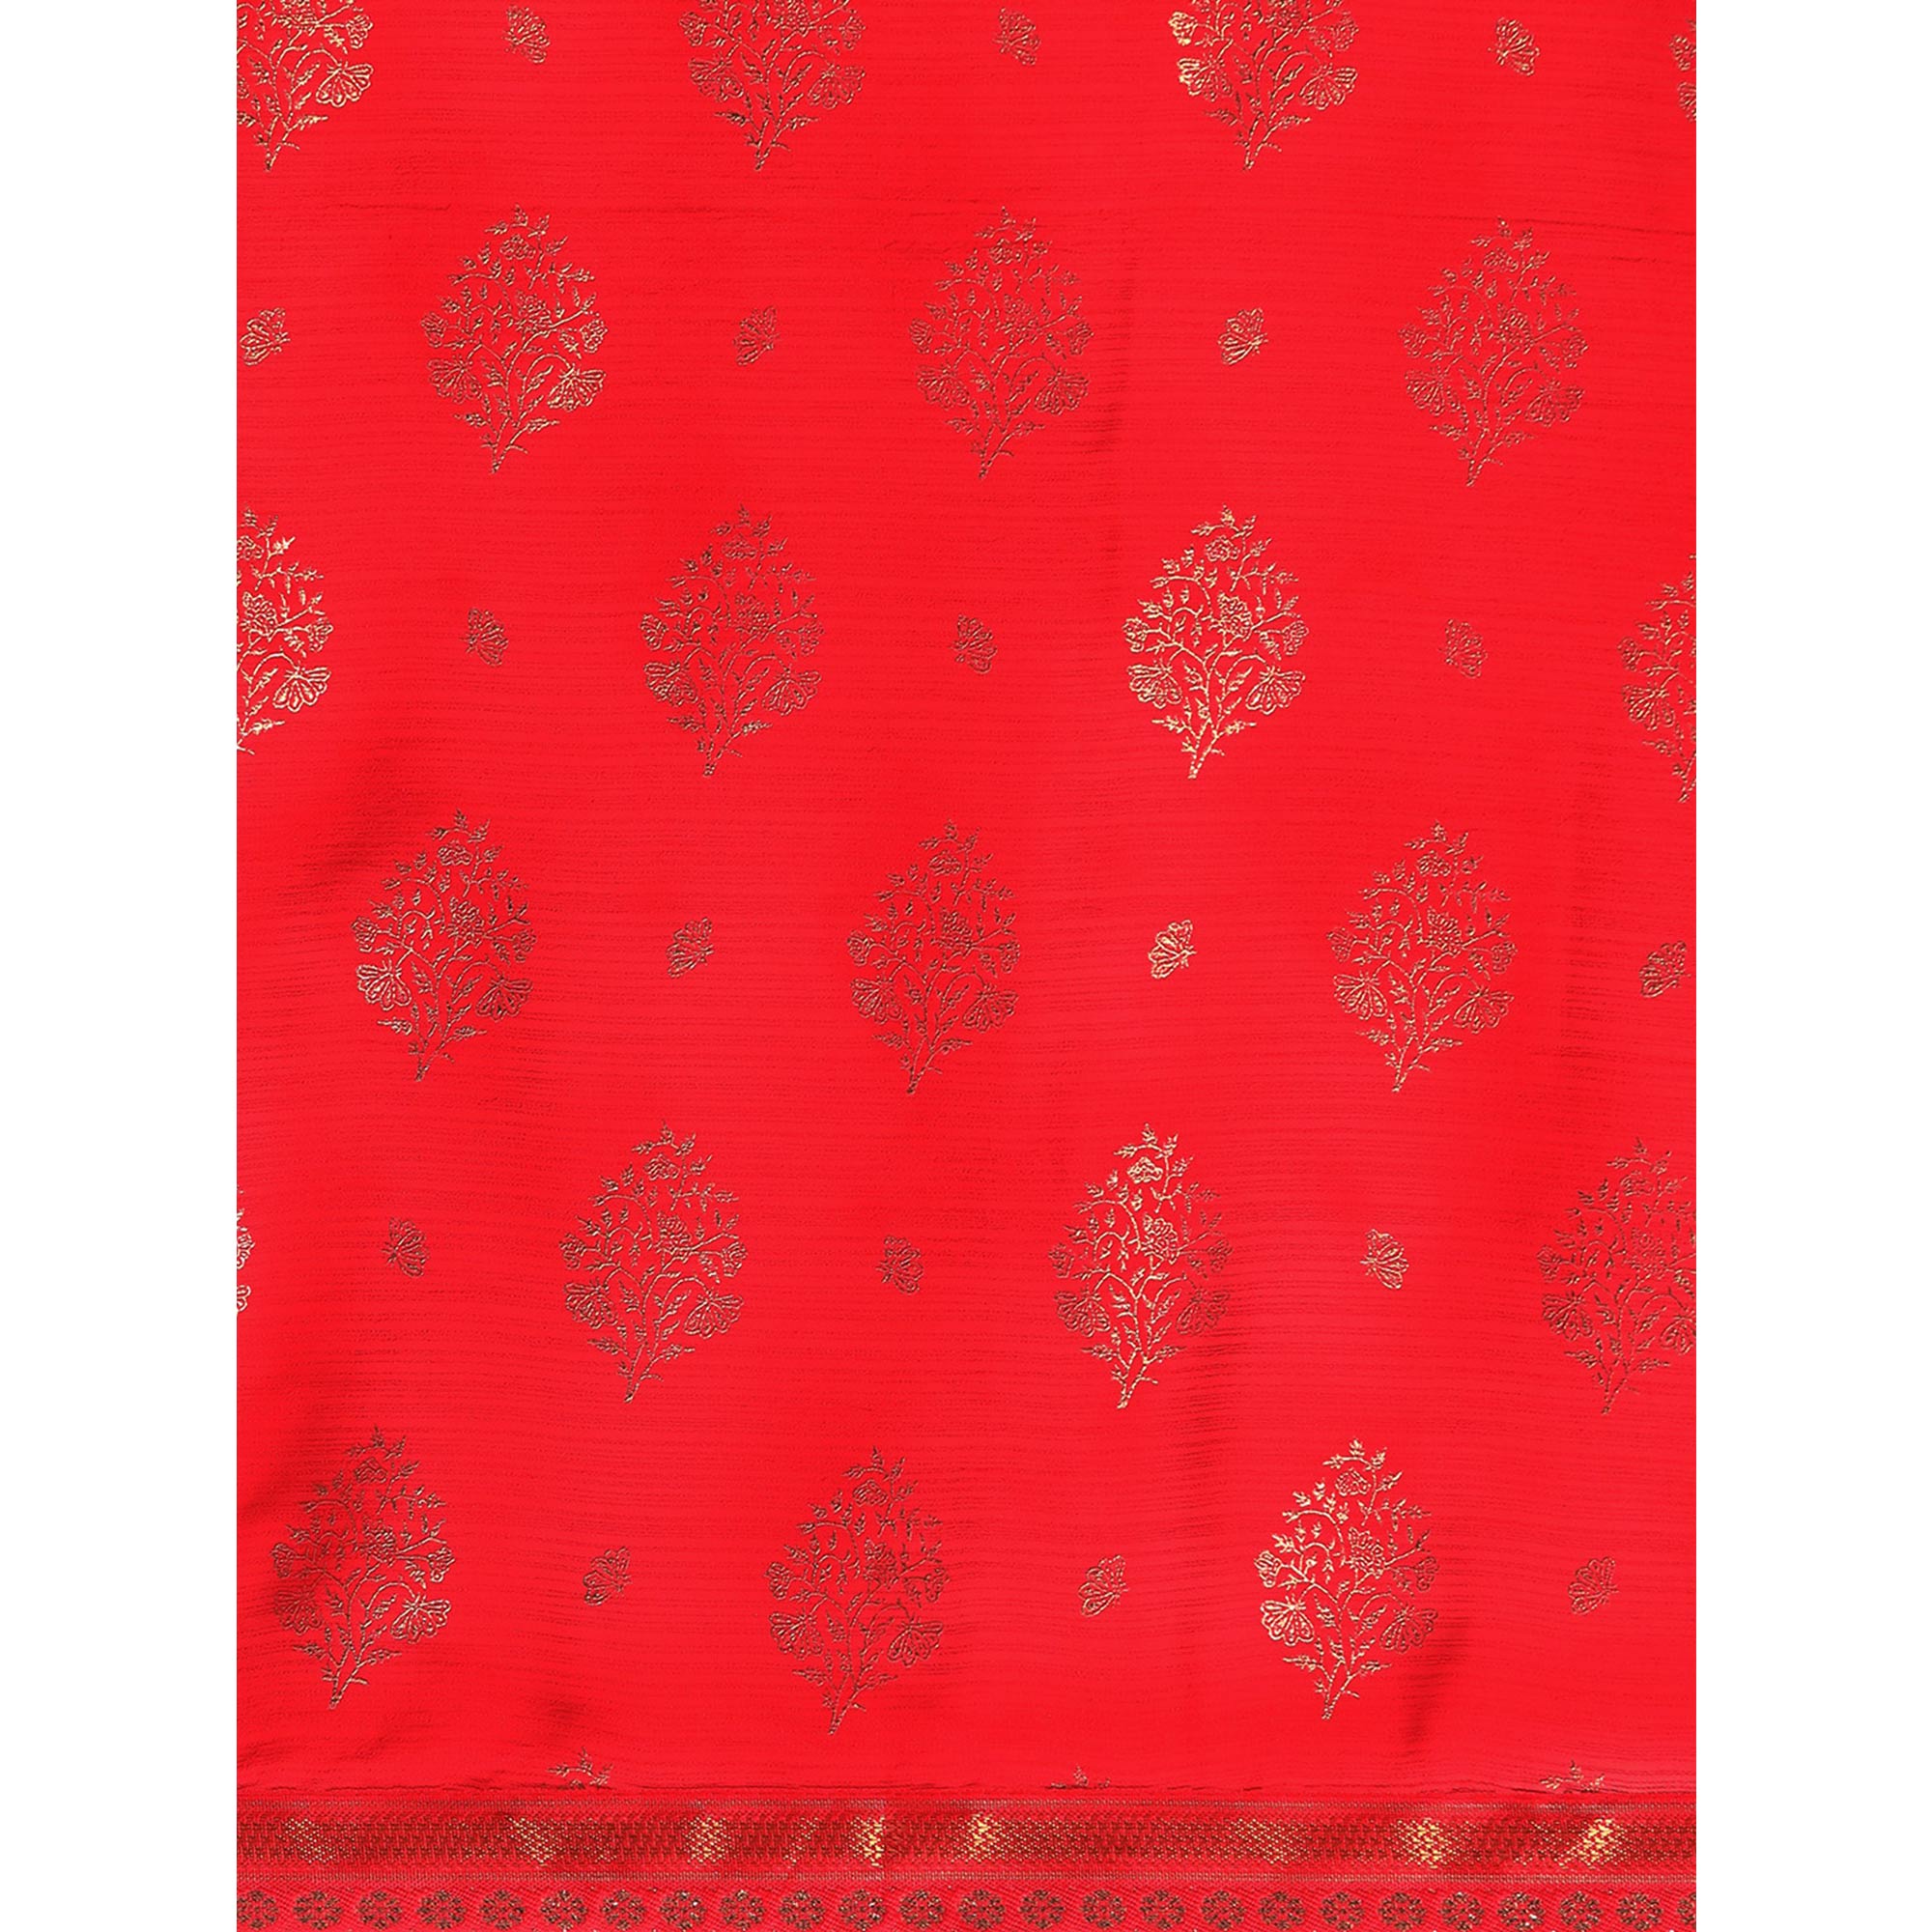 Red Floral Foil Printed Chiffon Saree With Tassels